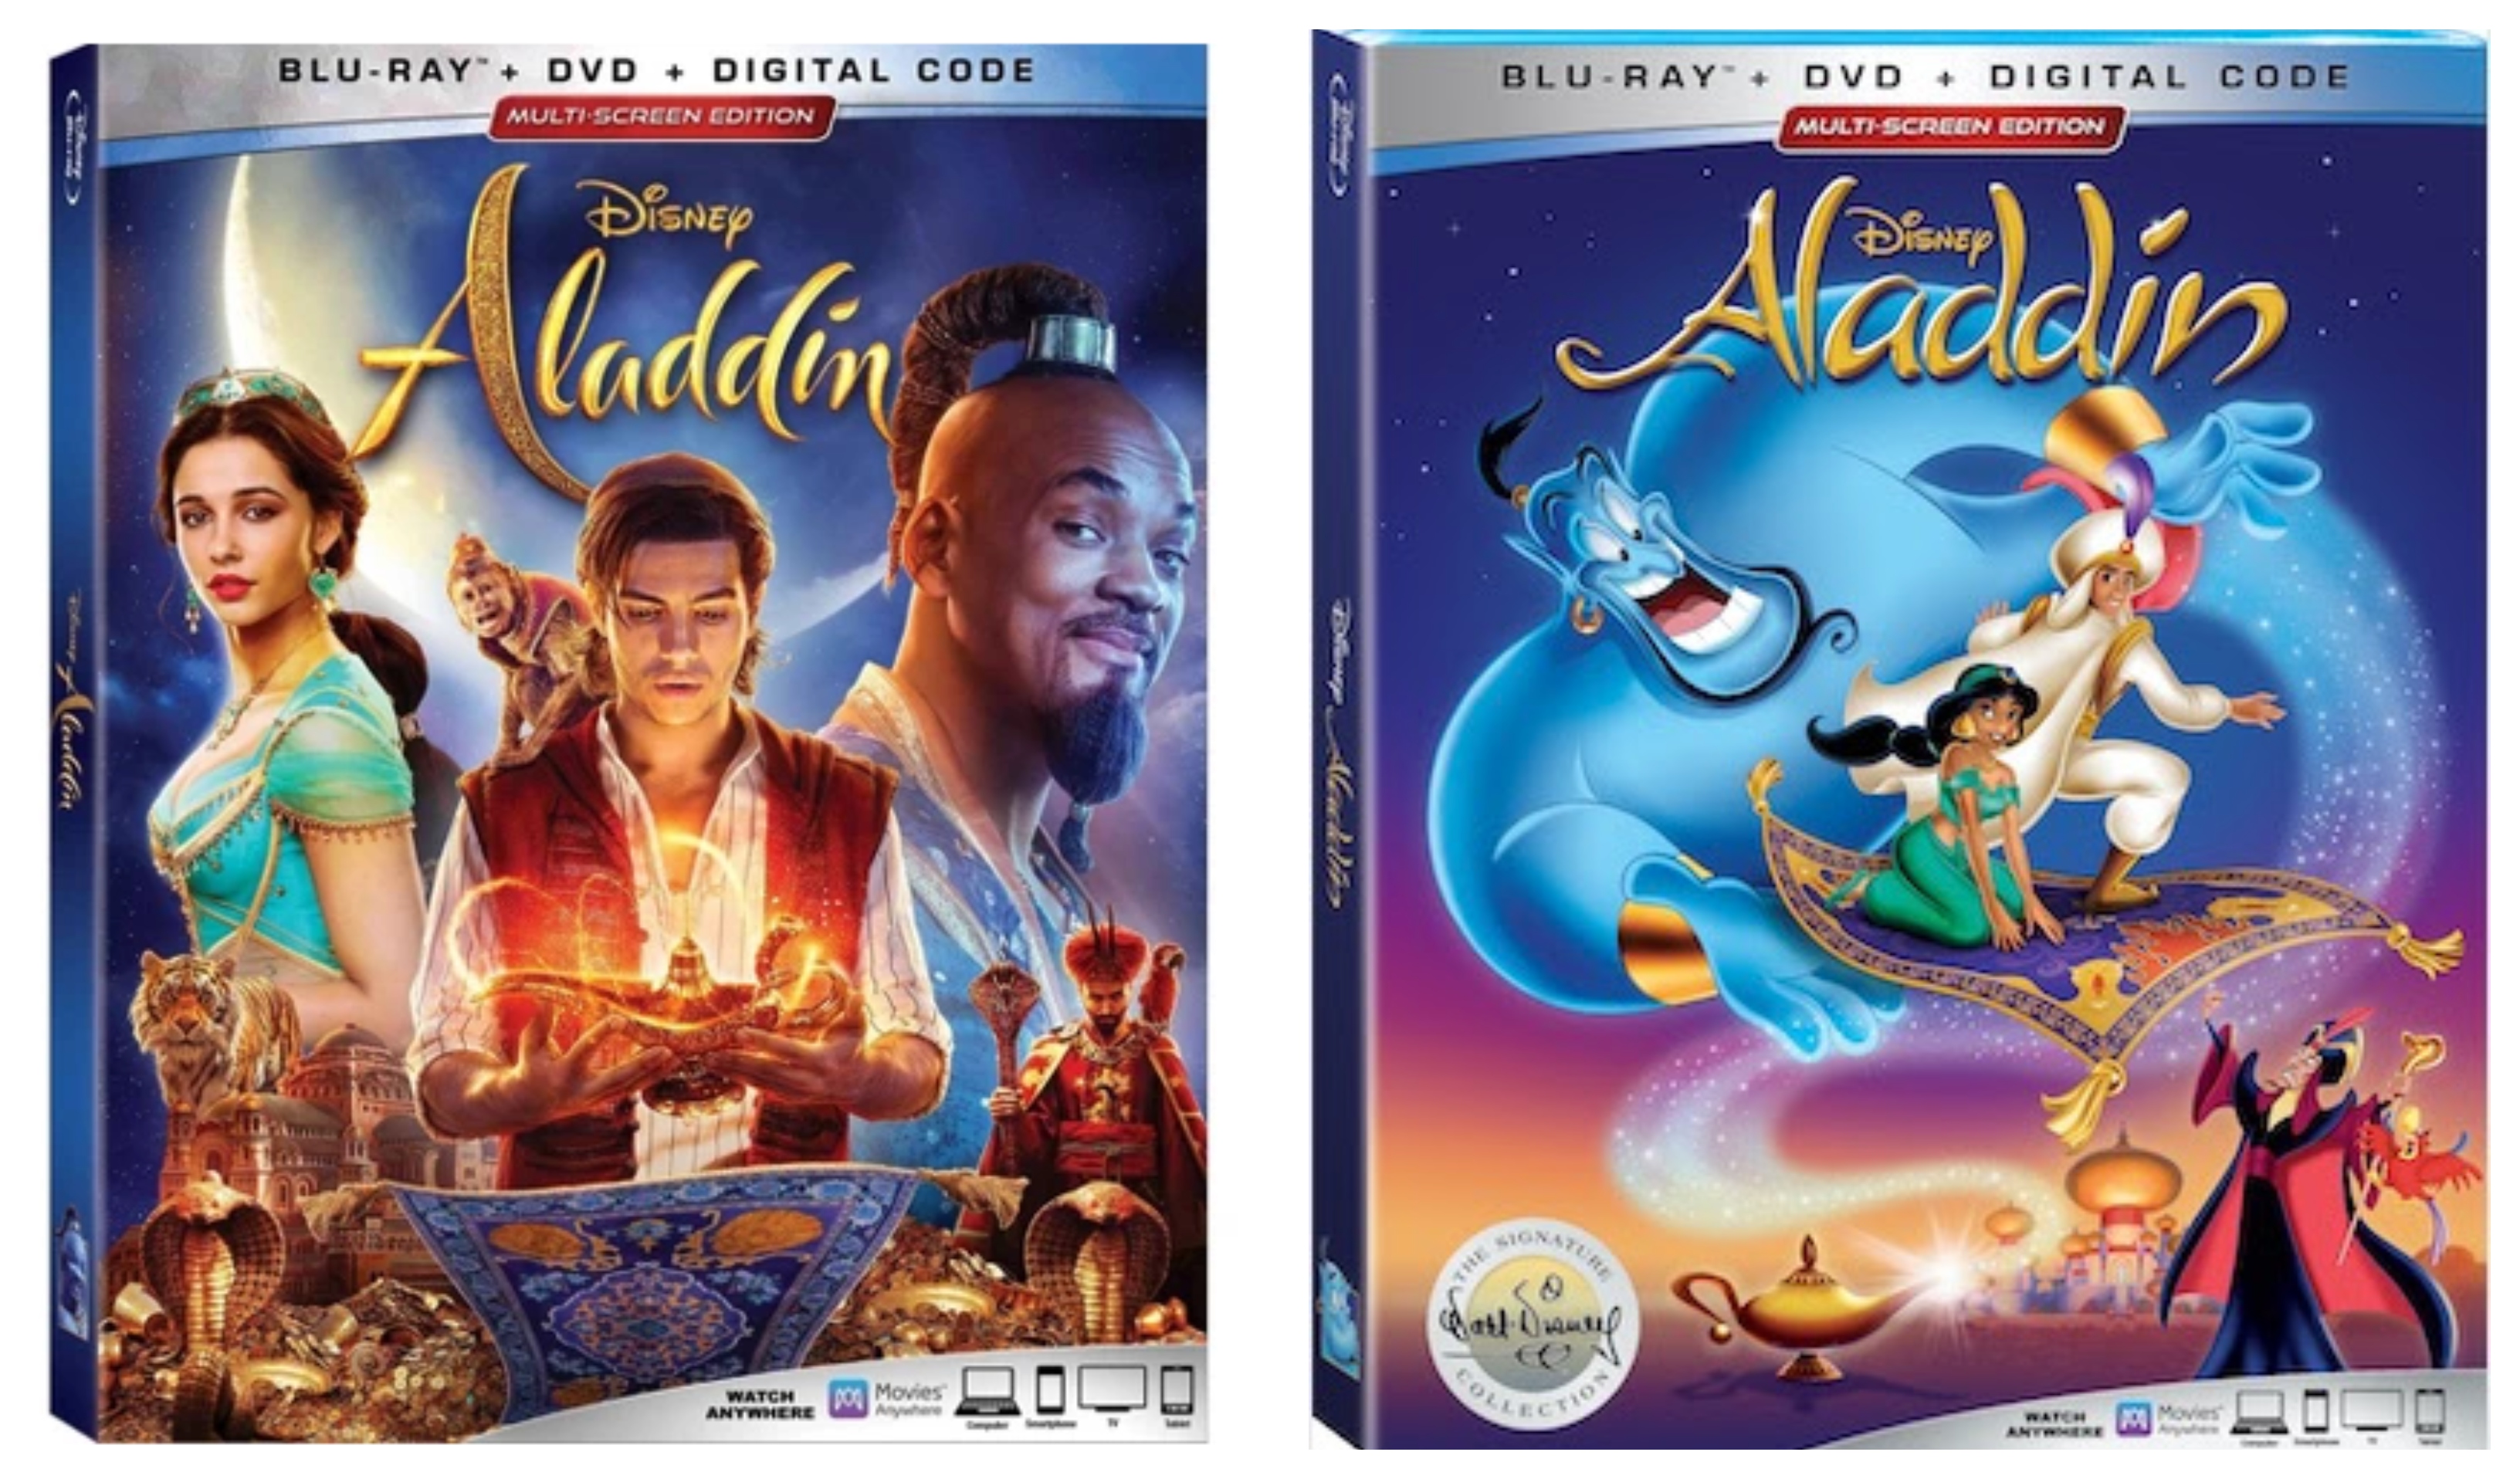 Experience the Original and Live Action Disney’s Aladdin on Digital & Bluray starting this August